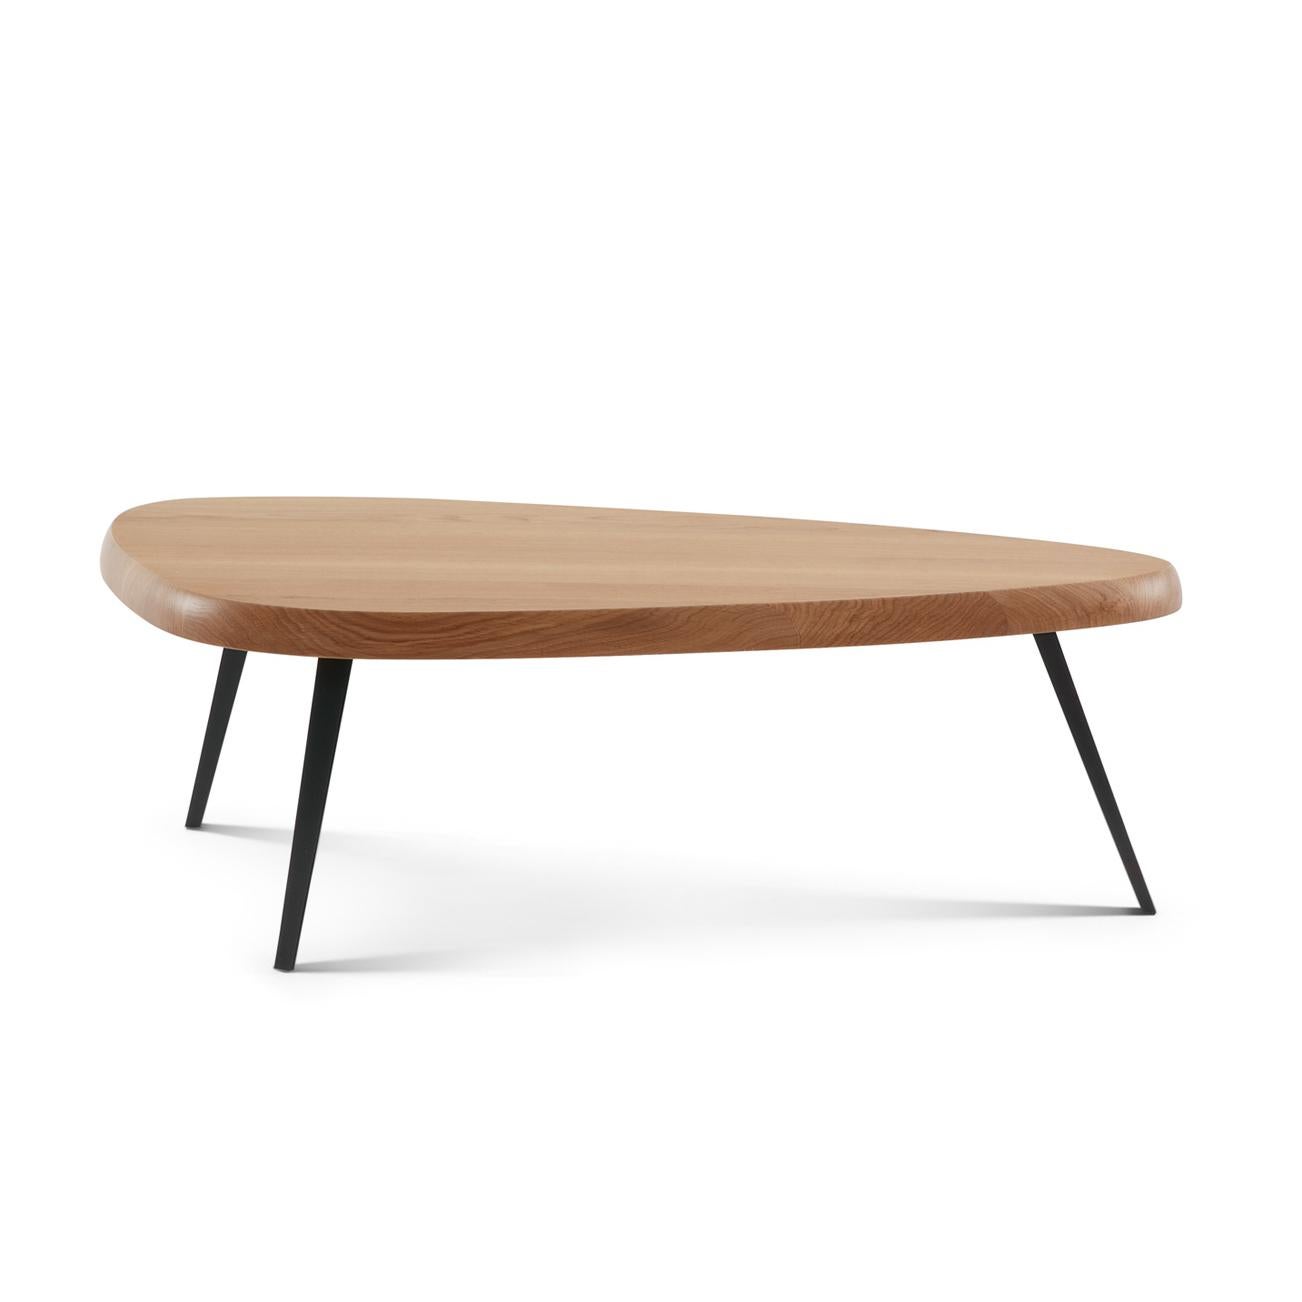 Table designed by Charlotte Perriand in 1952-1956. Relaunched in 2014.
Manufactured by Cassina in Italy.

Included as one of the tables en forme libre created between 1938 and 1939, the final design was developed in 1952 for the students’ rooms